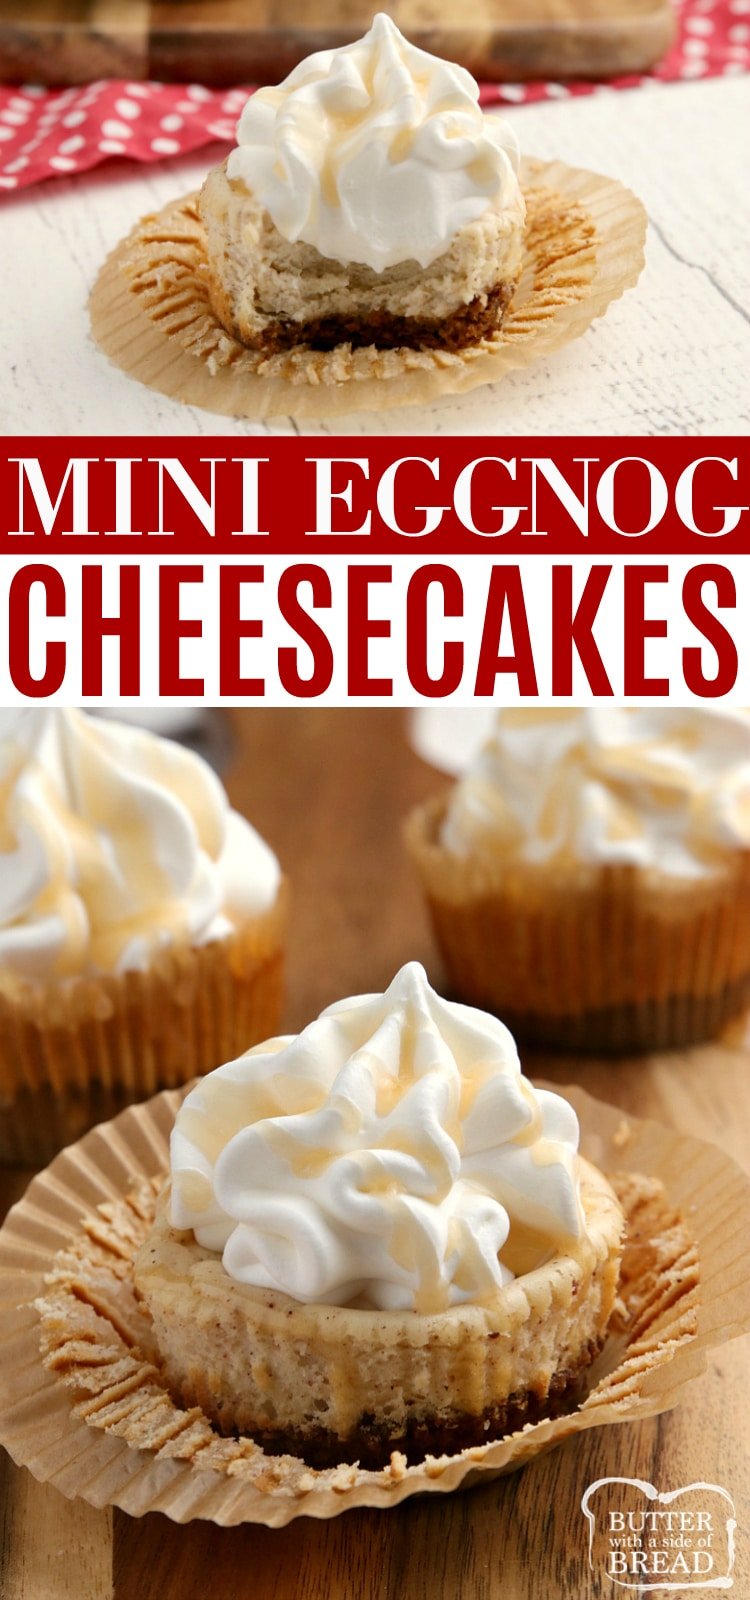 Mini Eggnog Cheesecakes with a creamy, spiced eggnog filling and a gingersnap cookie for the crust. Add some whipped cream and caramel topping for a mini cheesecake recipe that is absolutely delicious!